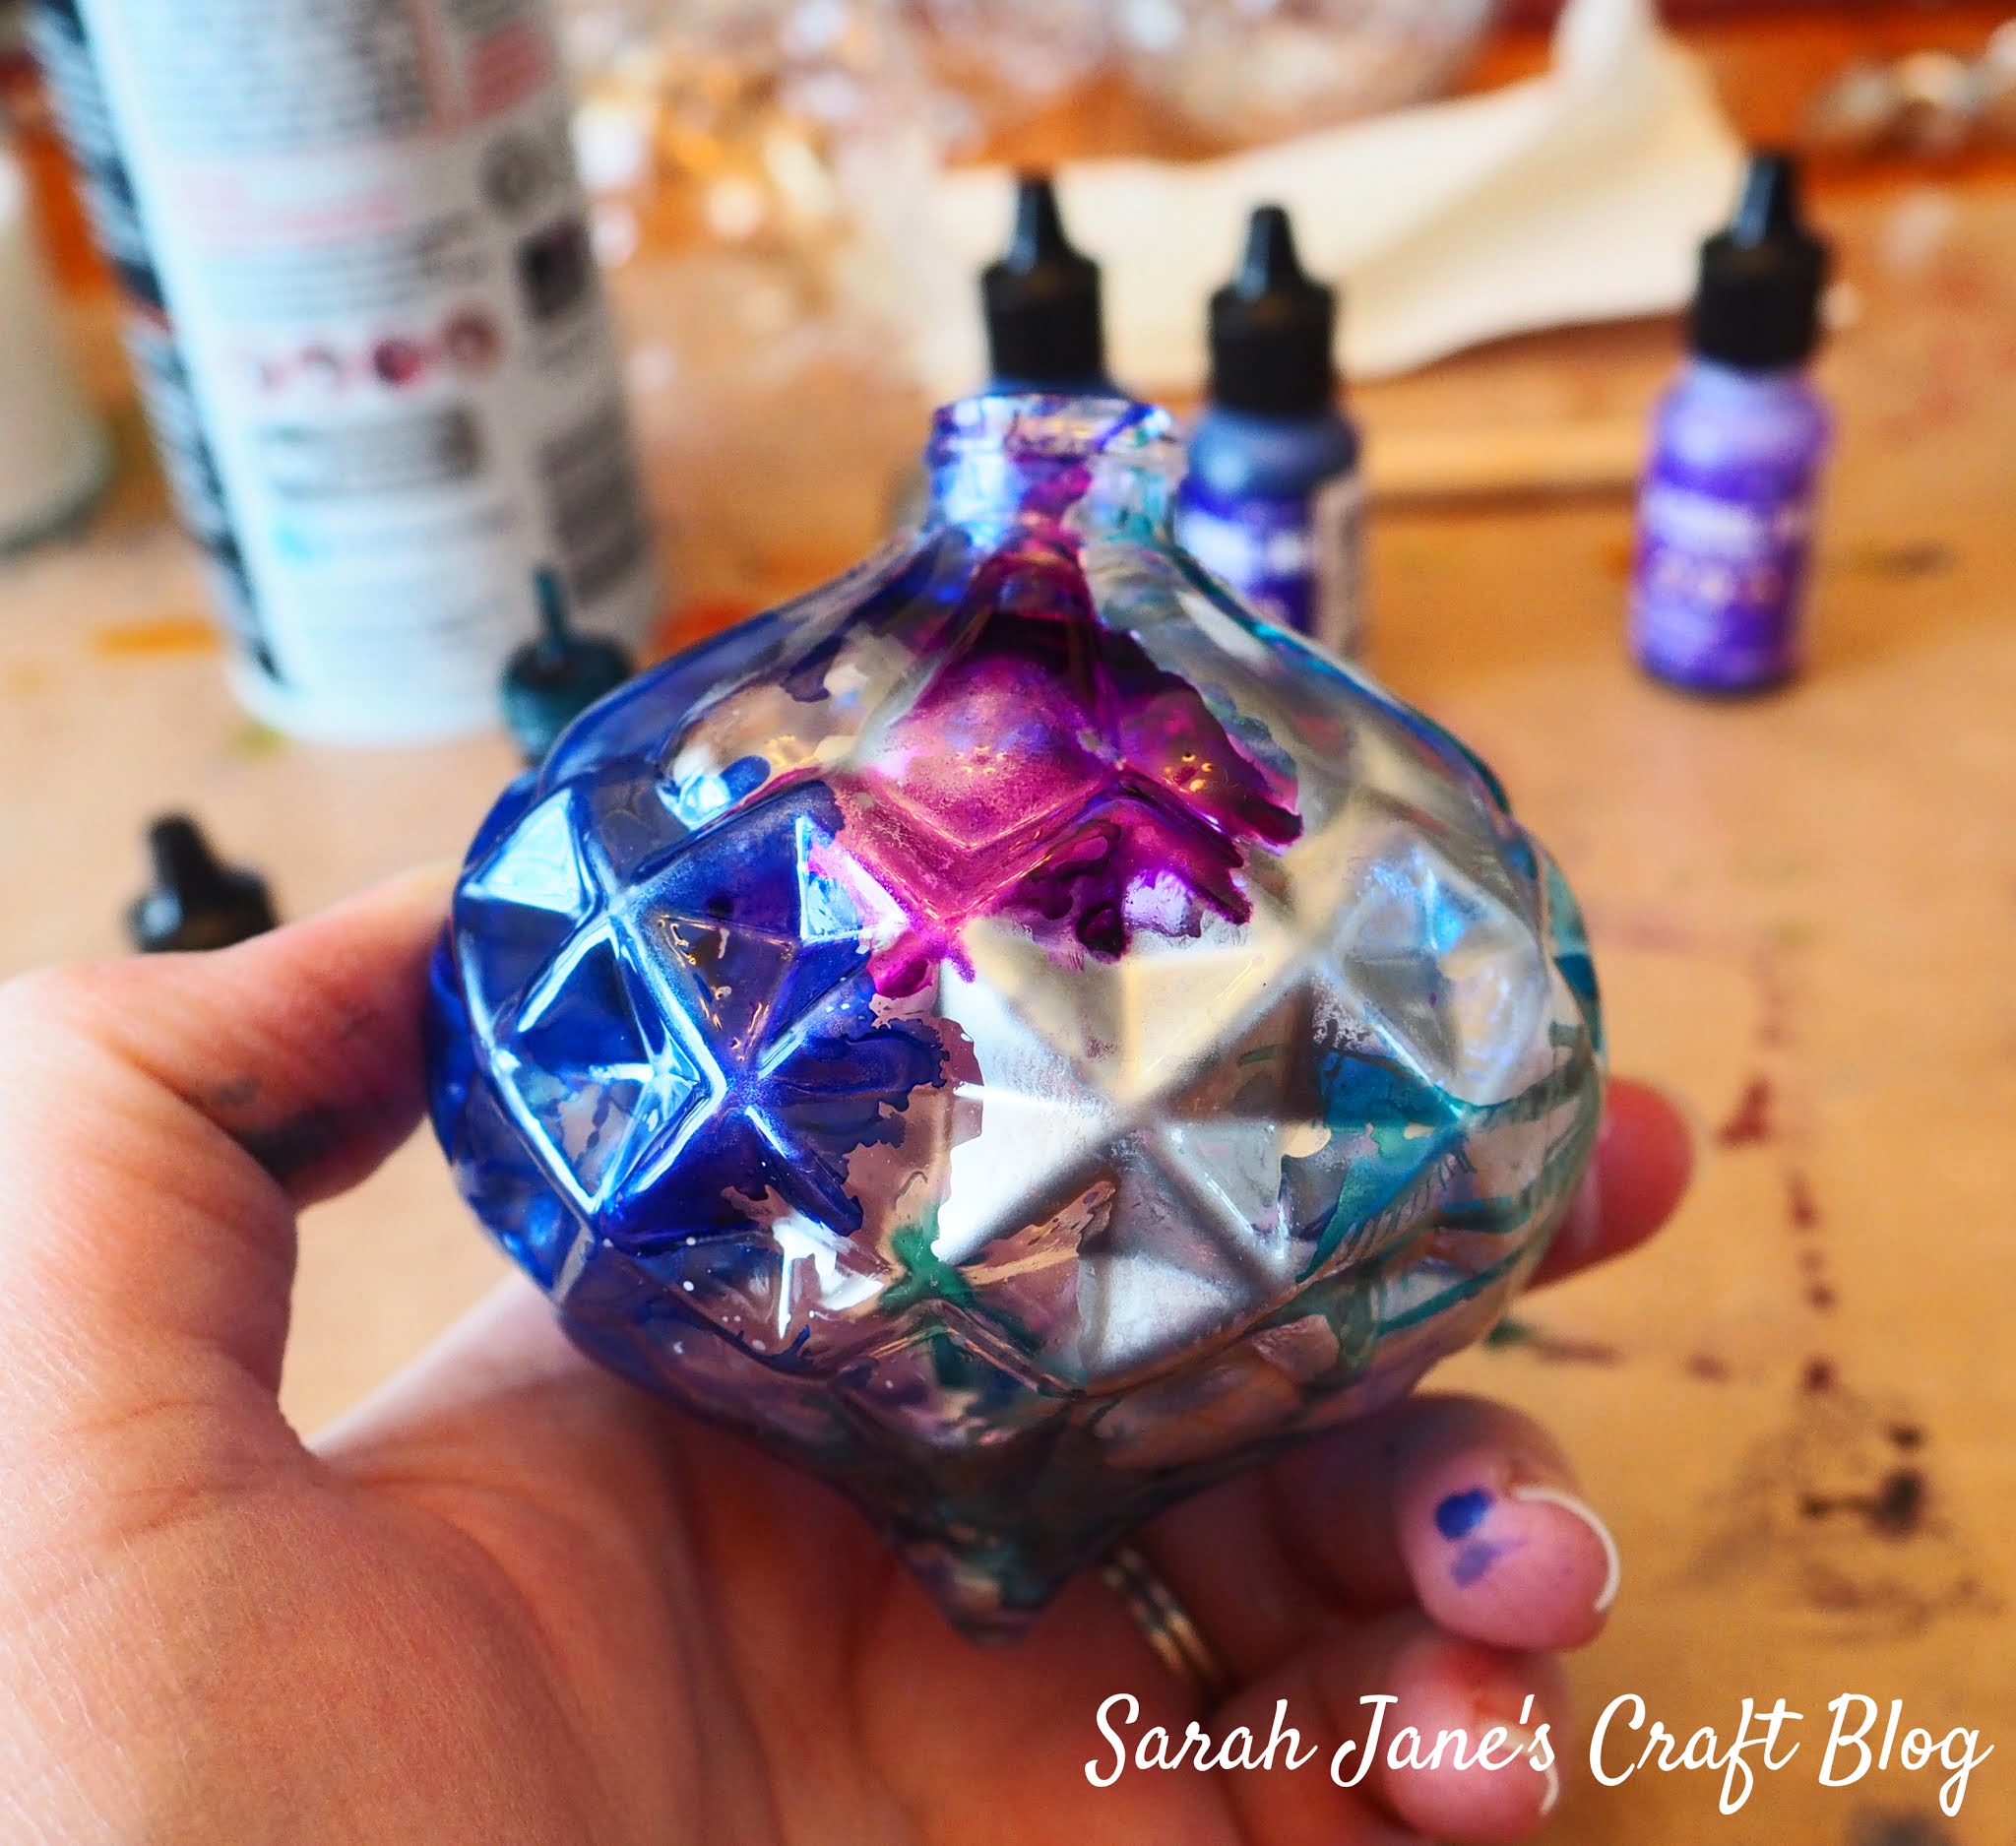 How to Make Alcohol Ink Ornaments - Semigloss Design